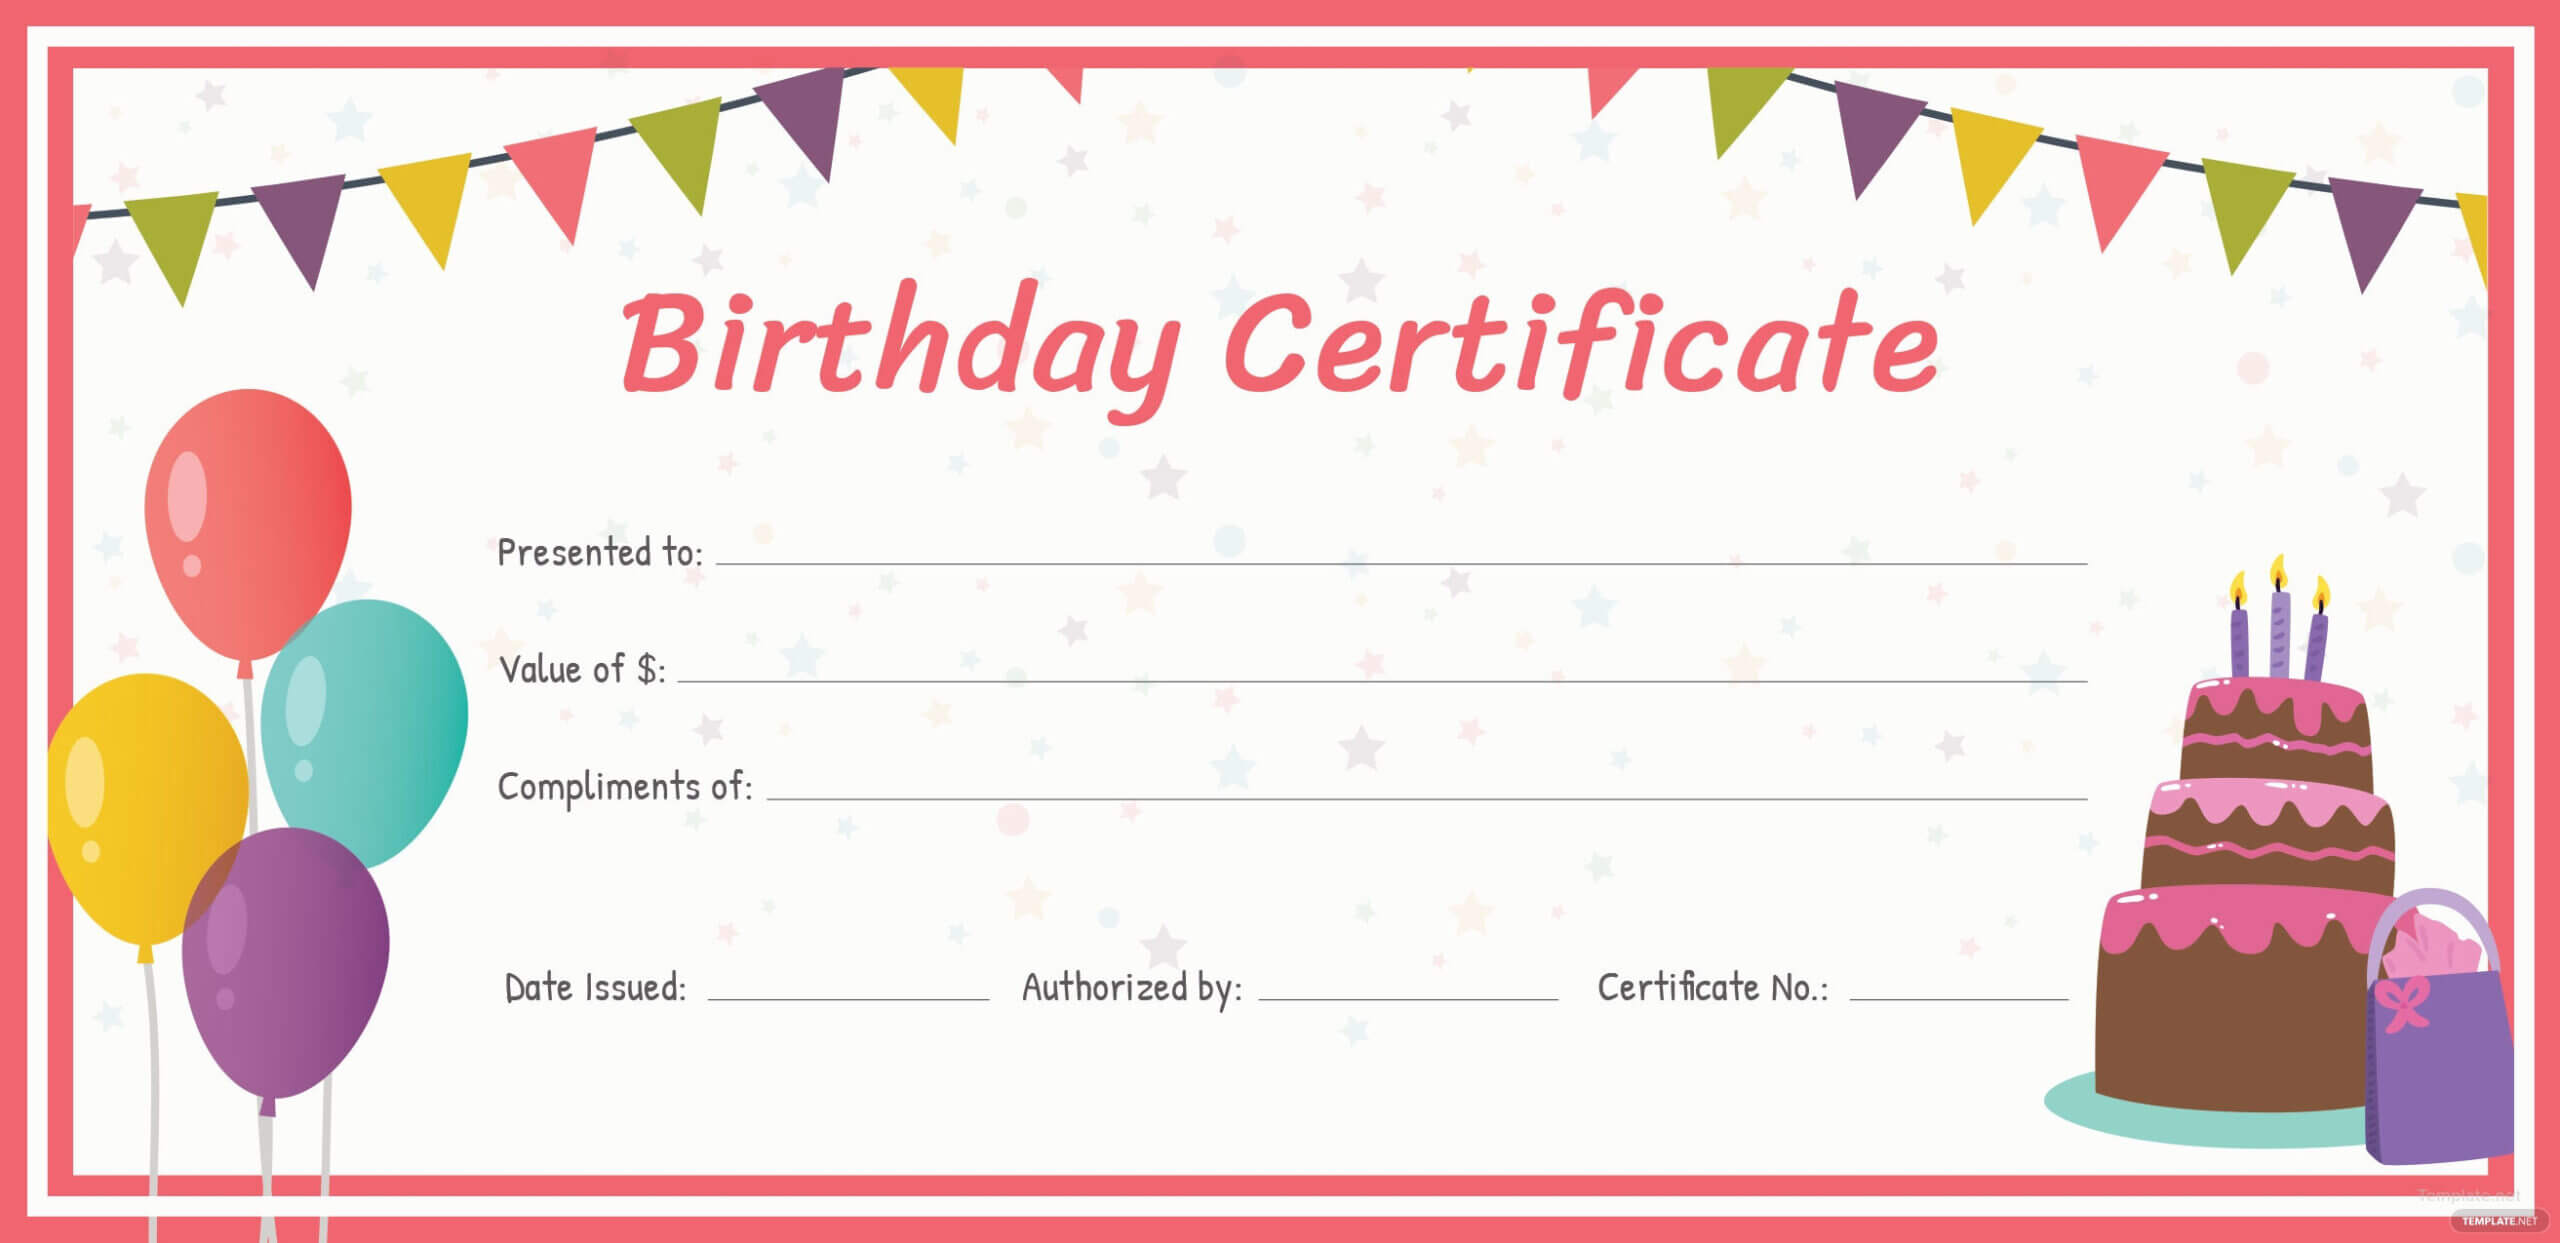 Birthday Coupon Template For Mac Intended For Custom Gift Certificate Template